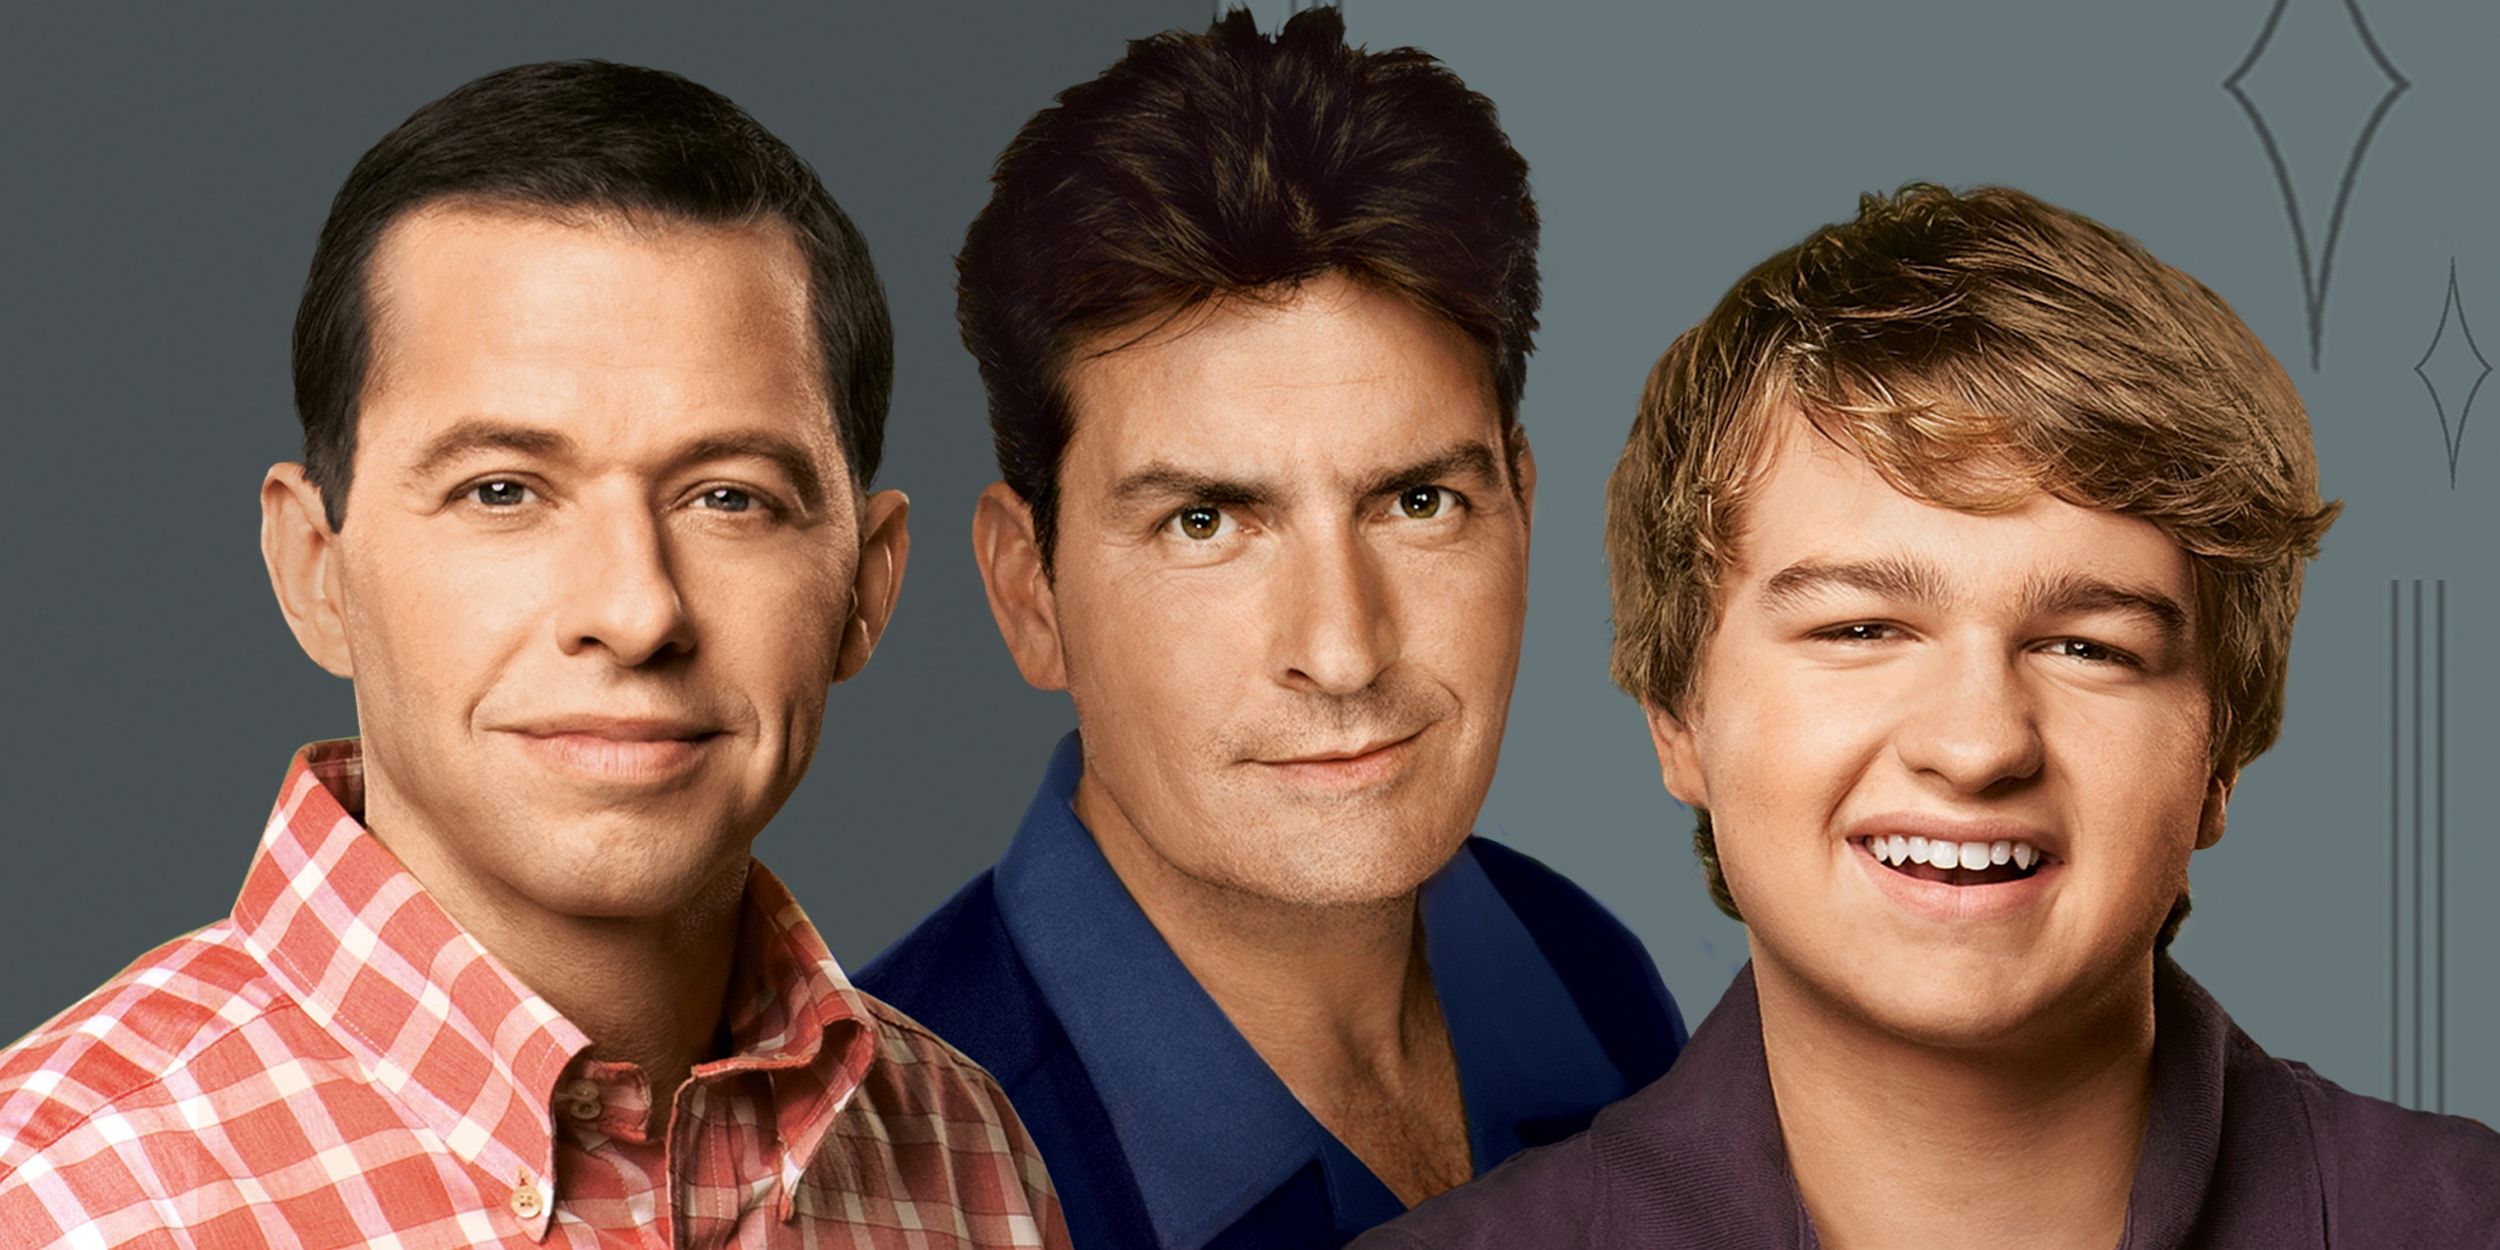 Two and a Half Men stars Jon Cryer, Charlie Sheen, and Angus T. Jones